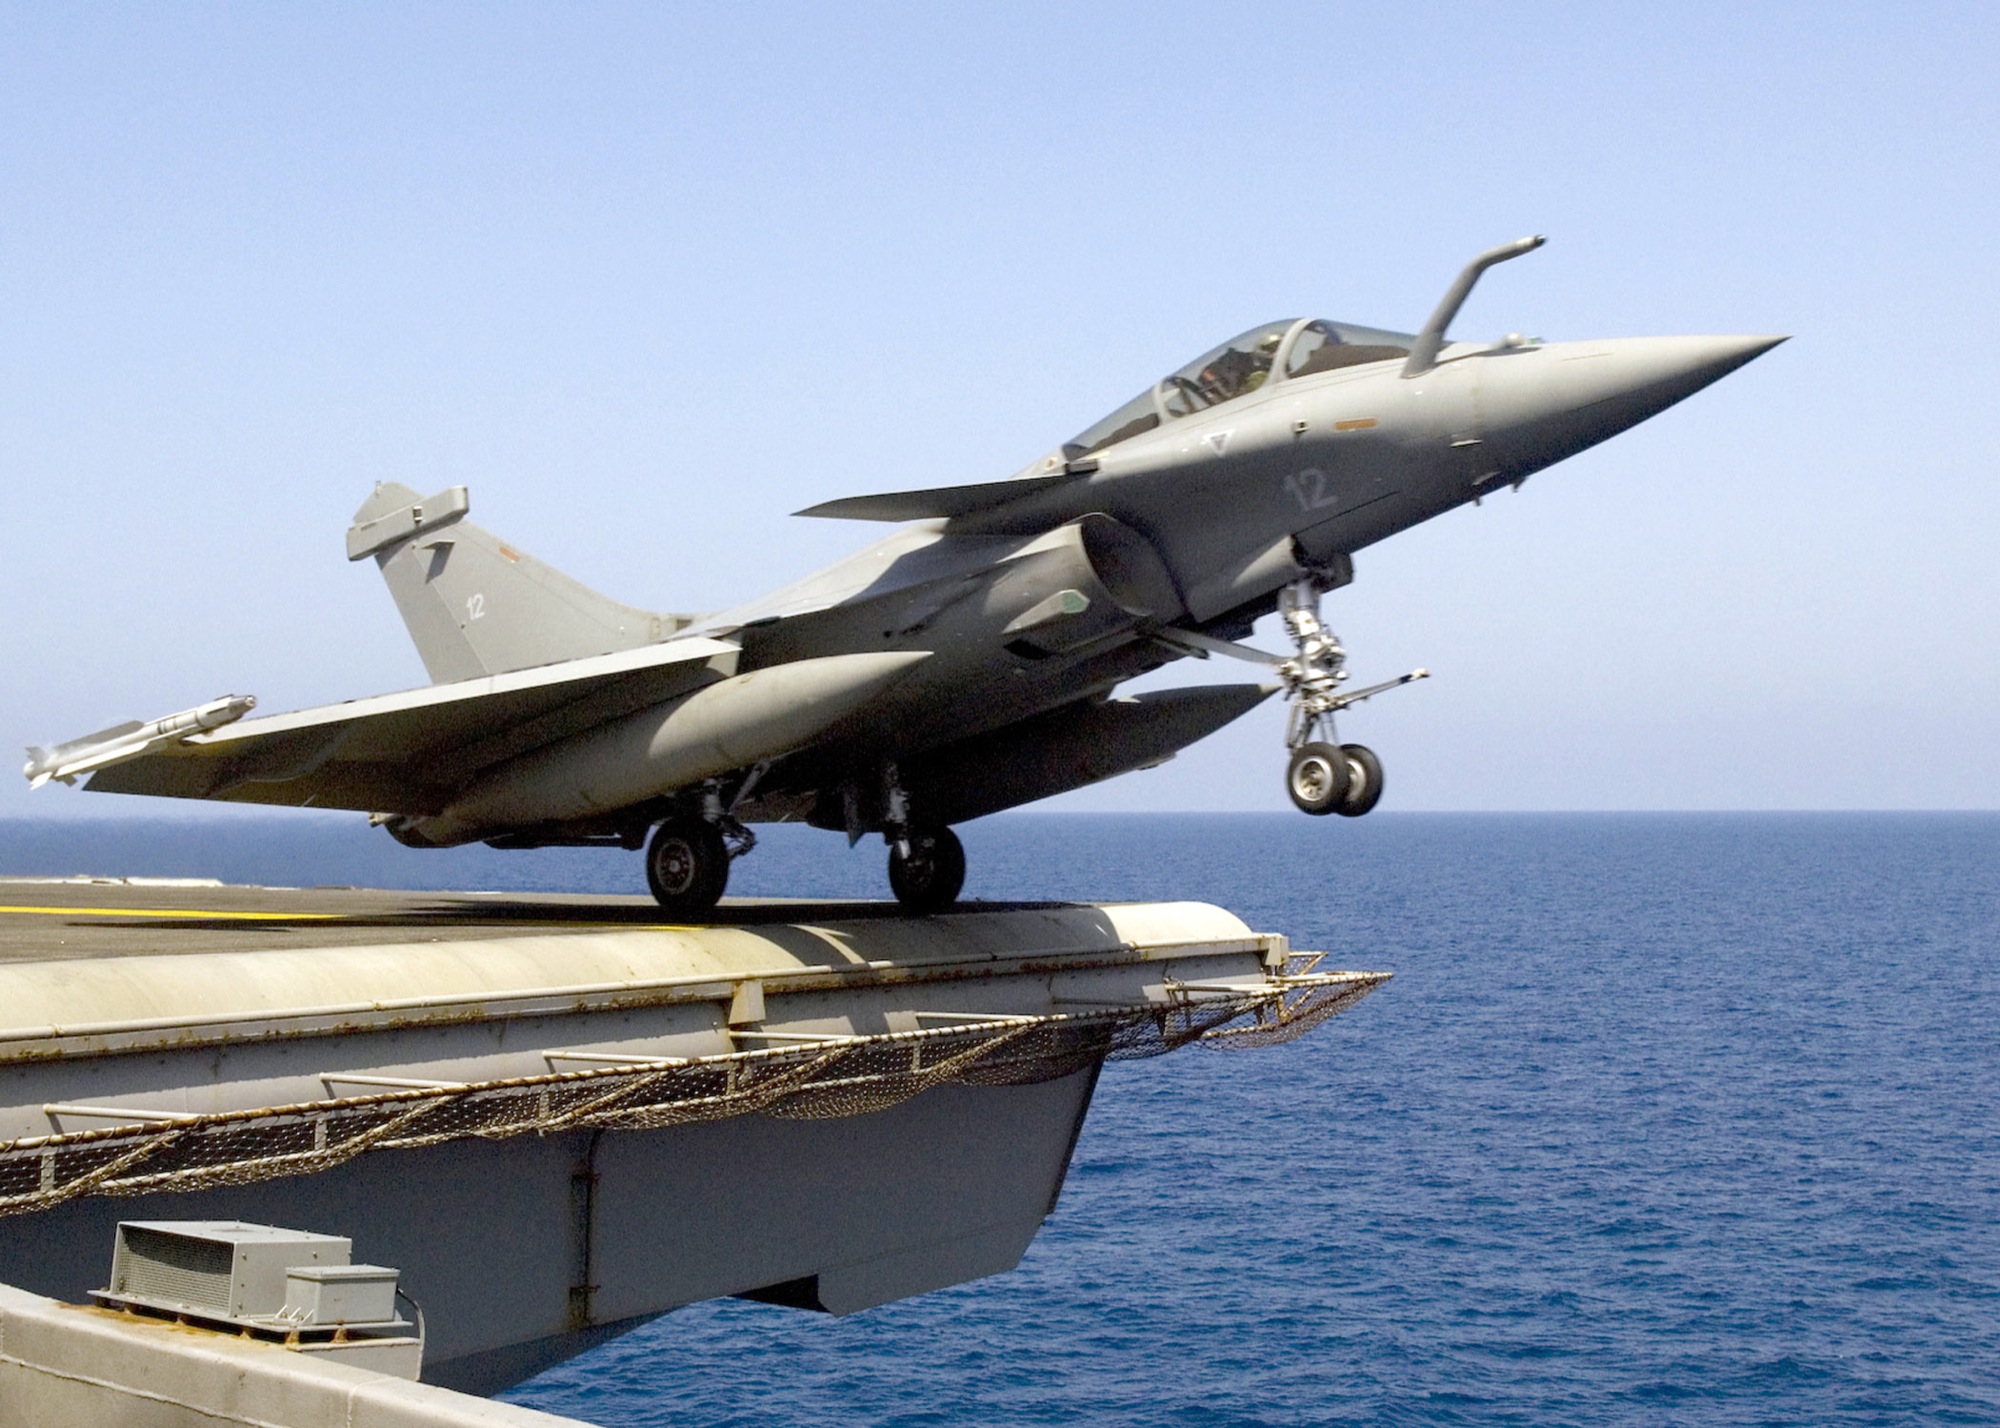 A Rafale aircraft leaving the flight deck of a carrier.